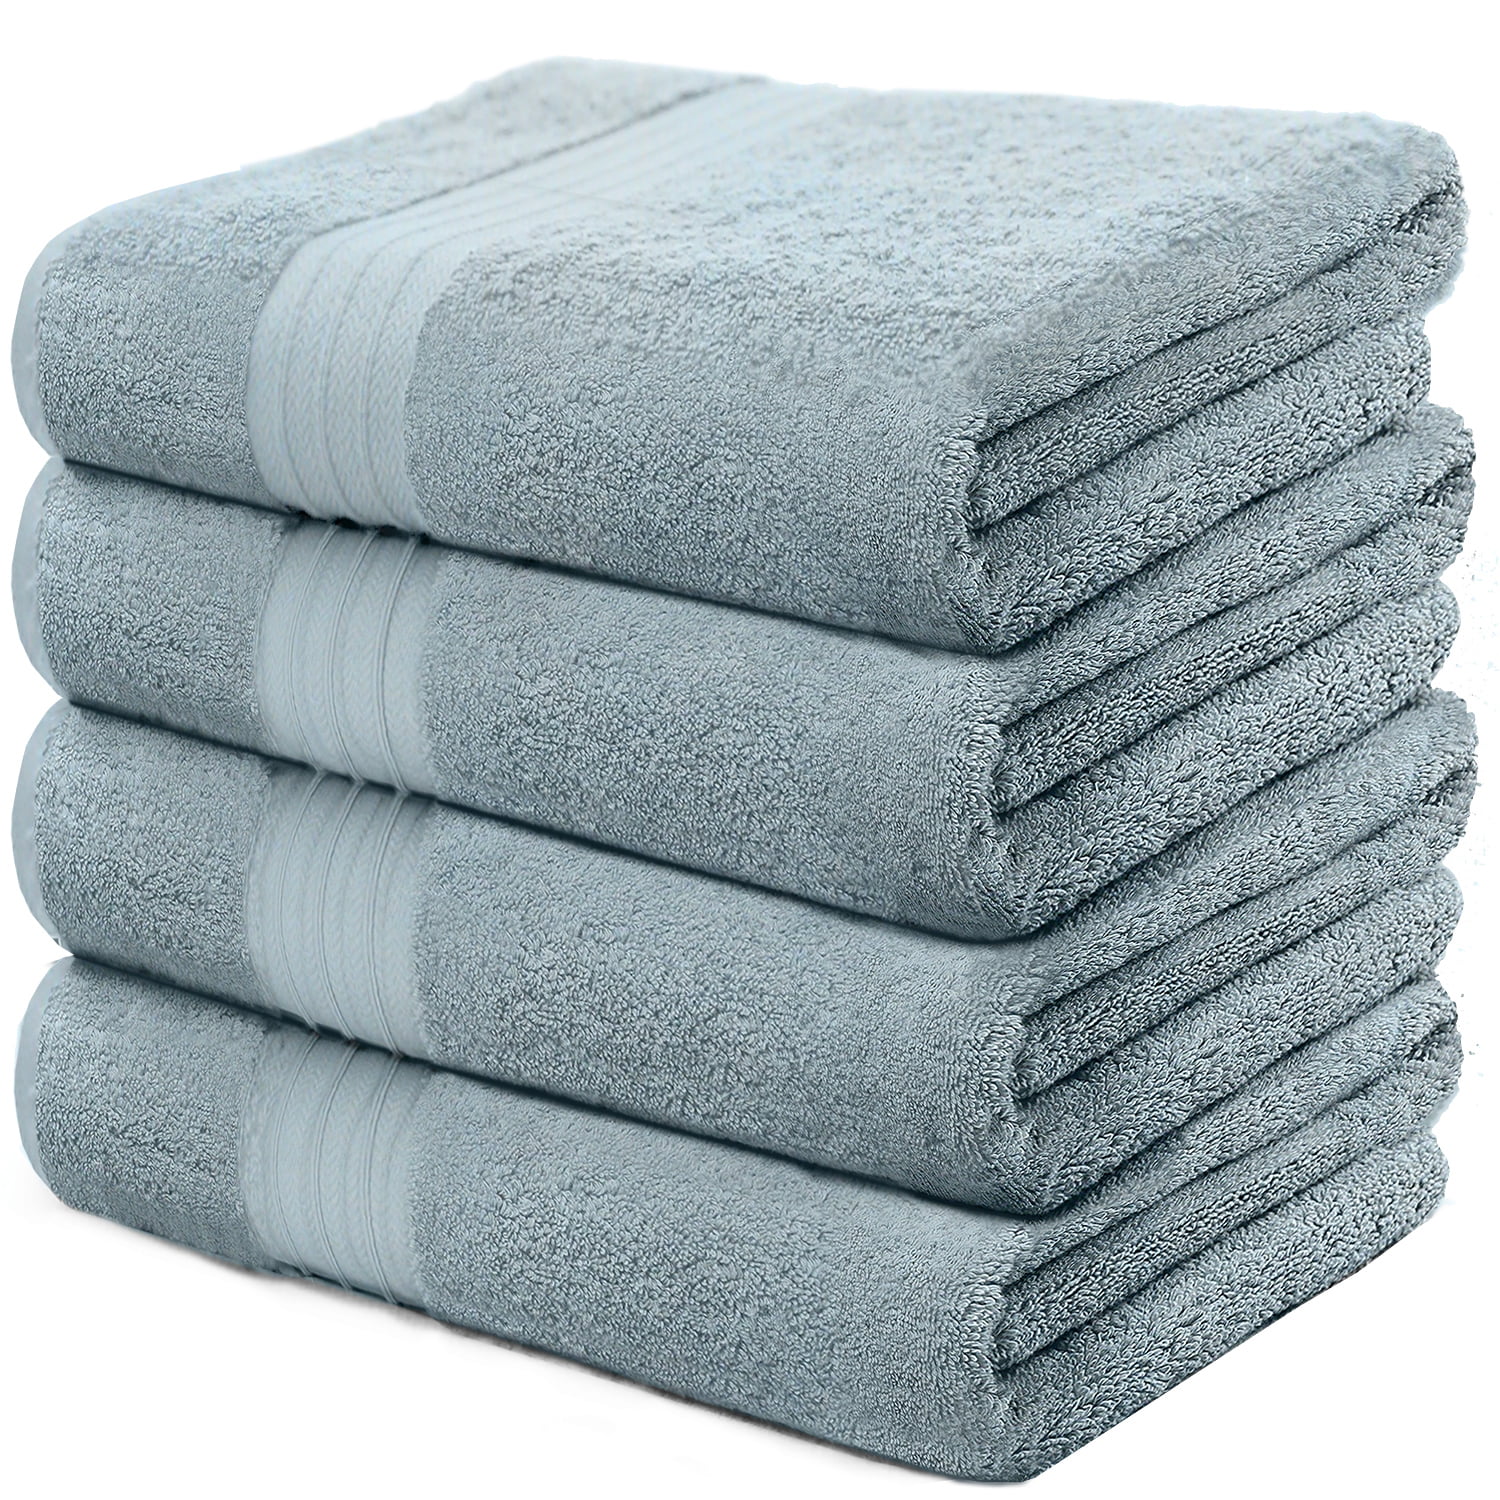 SEMAXE Cotton Towel Absorbent & Soft Bathroom White Hand Towel,Experience Outfit,16”X 27”